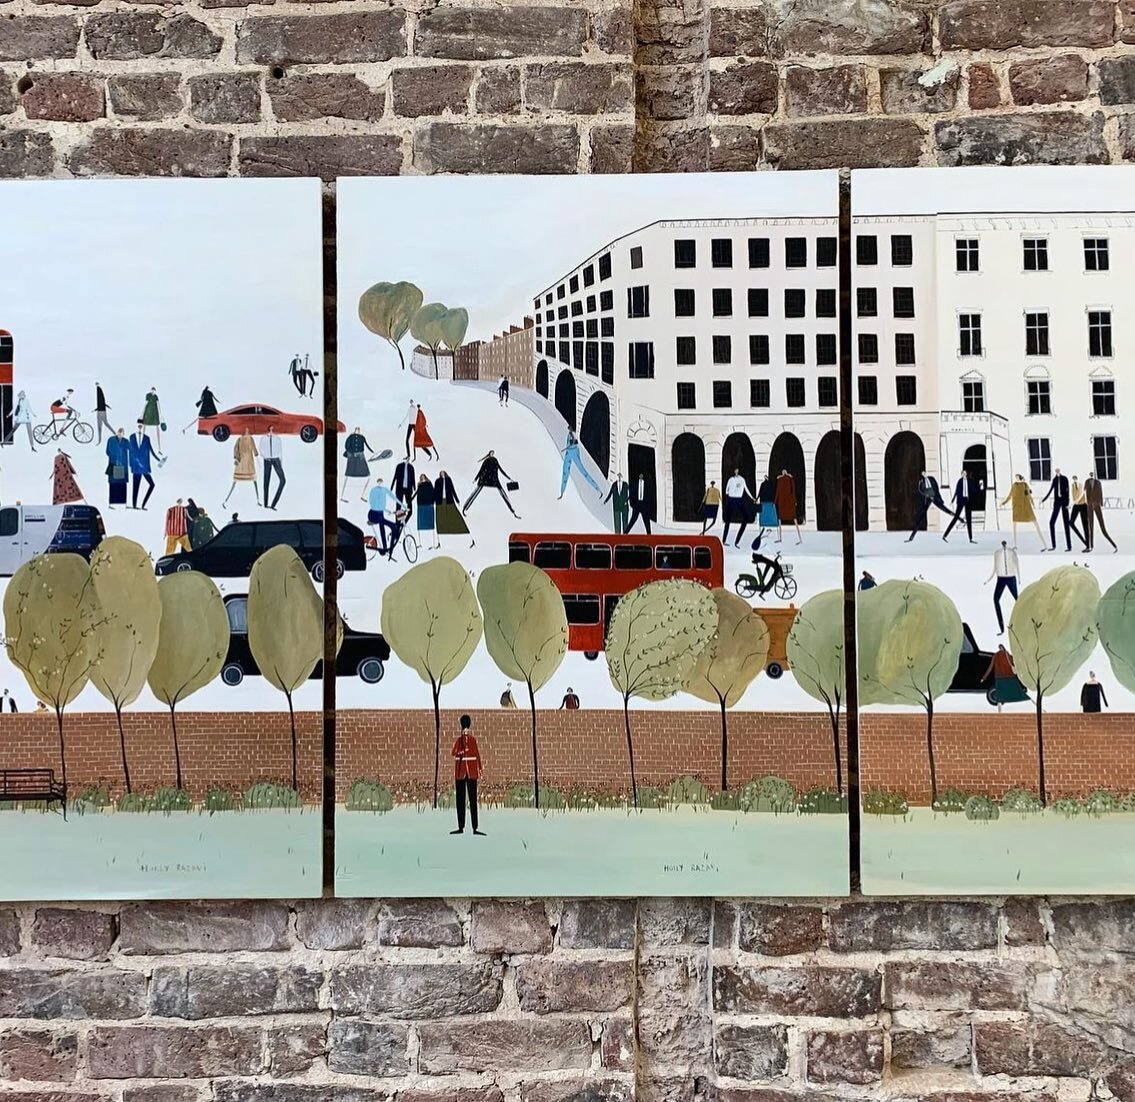 This Holly Razavi triptych was commissioned by a company for their new London offices. Each of the employees is depicted on their commute into work - and they&rsquo;re all smiling! With her unique style and vision, Holly has created an energetic, upl